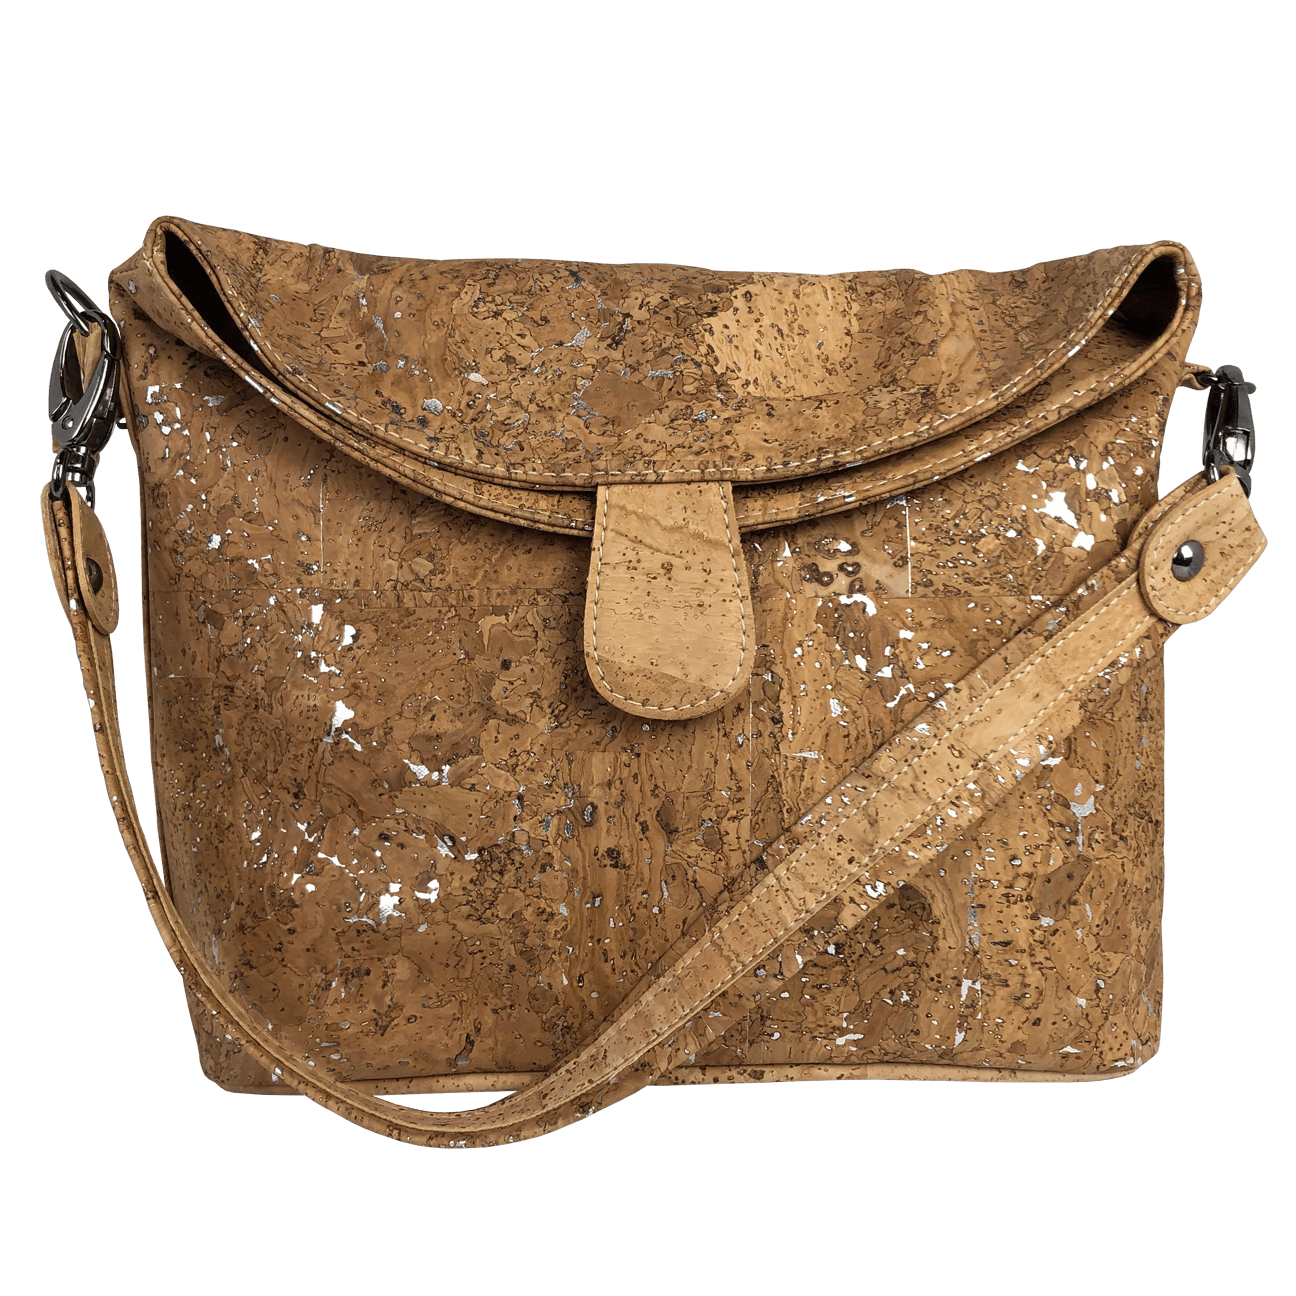 Marks Collection Cross Body Bag Clutch Shoulder Bag Purse Cork Fold Over  Zipper Button Inside Lining Light ECO : Amazon.in: Shoes & Handbags